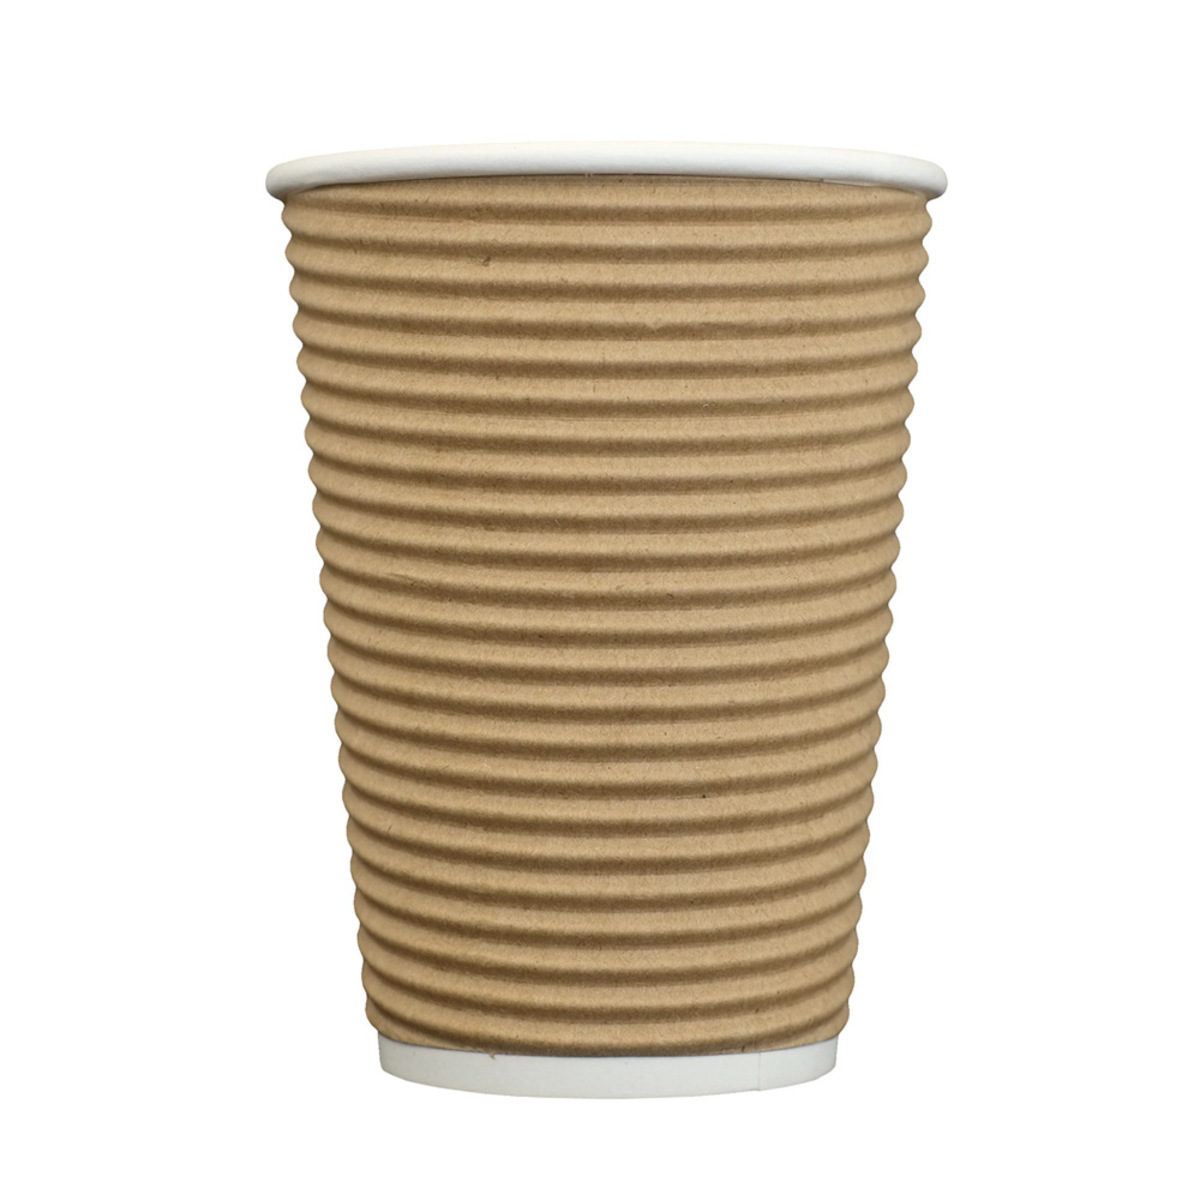 Cafe Express 10oz / 284ml Brown Corrugated Hot Cups, 1000 Pack